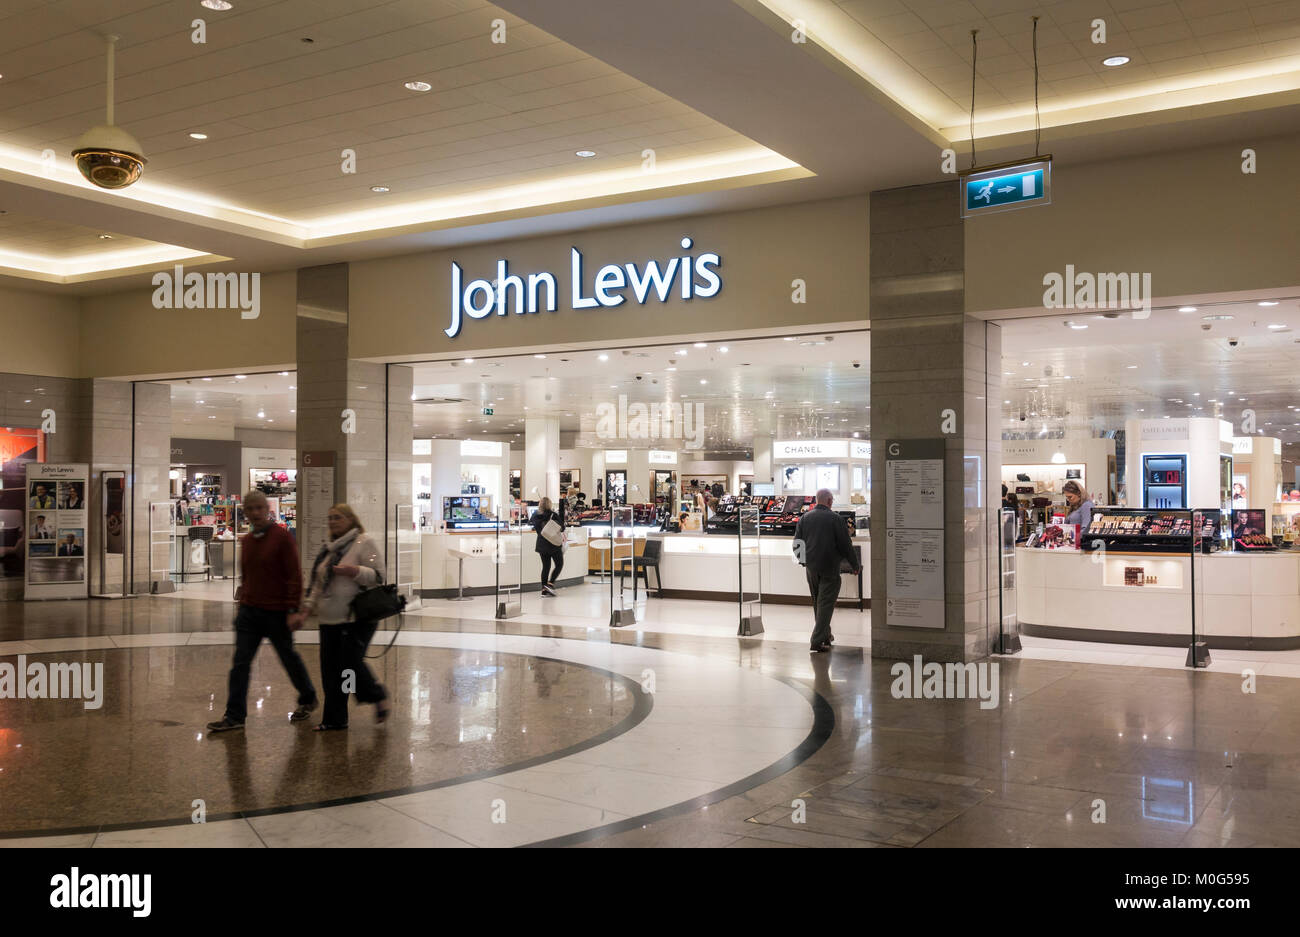 John Lewis Department Store in the Intu Trafford Centre, Manchester. Stock Photo